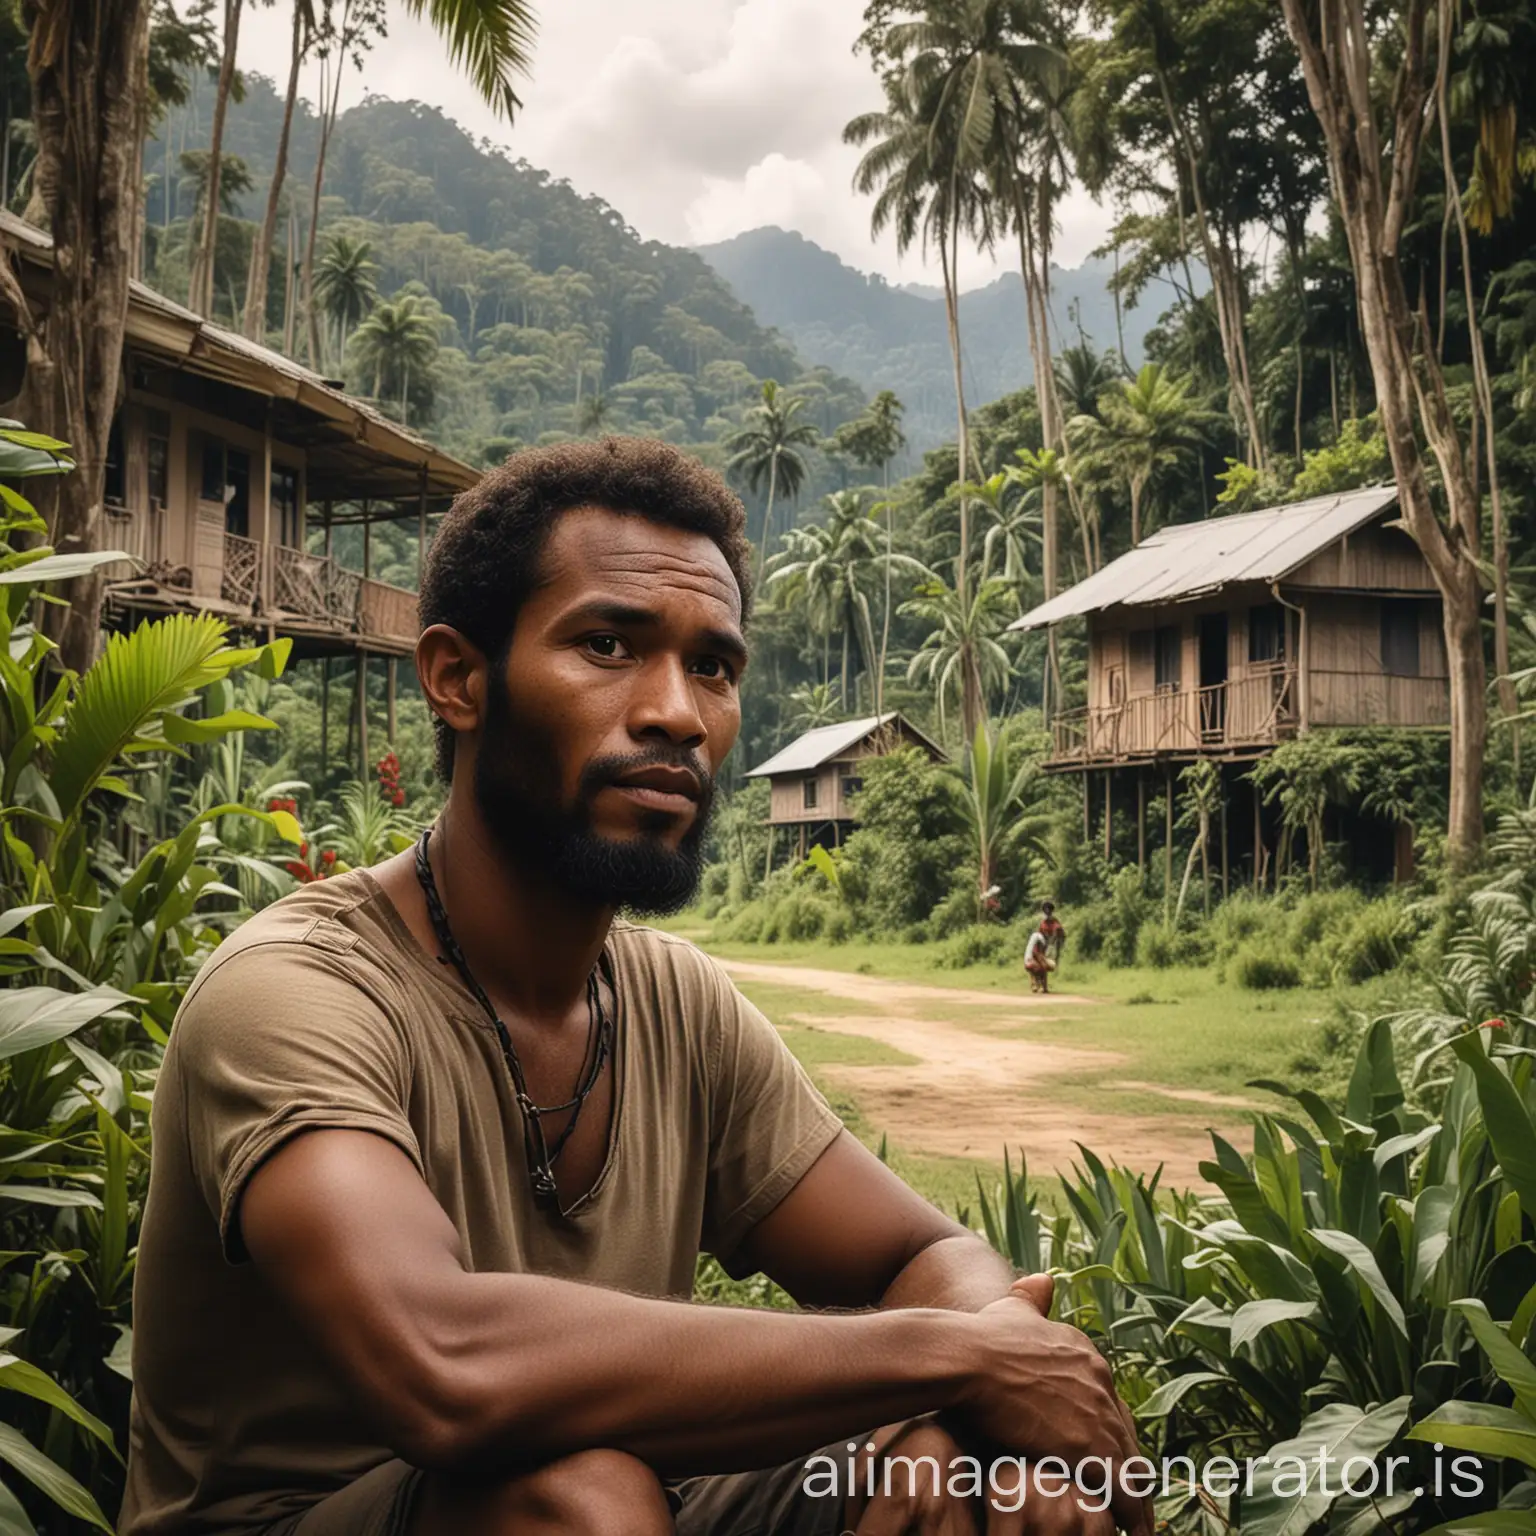 Create an illustration of Yohan, a father from a small village in Papua, sitting in front of his house with the background of the Papuan jungle.